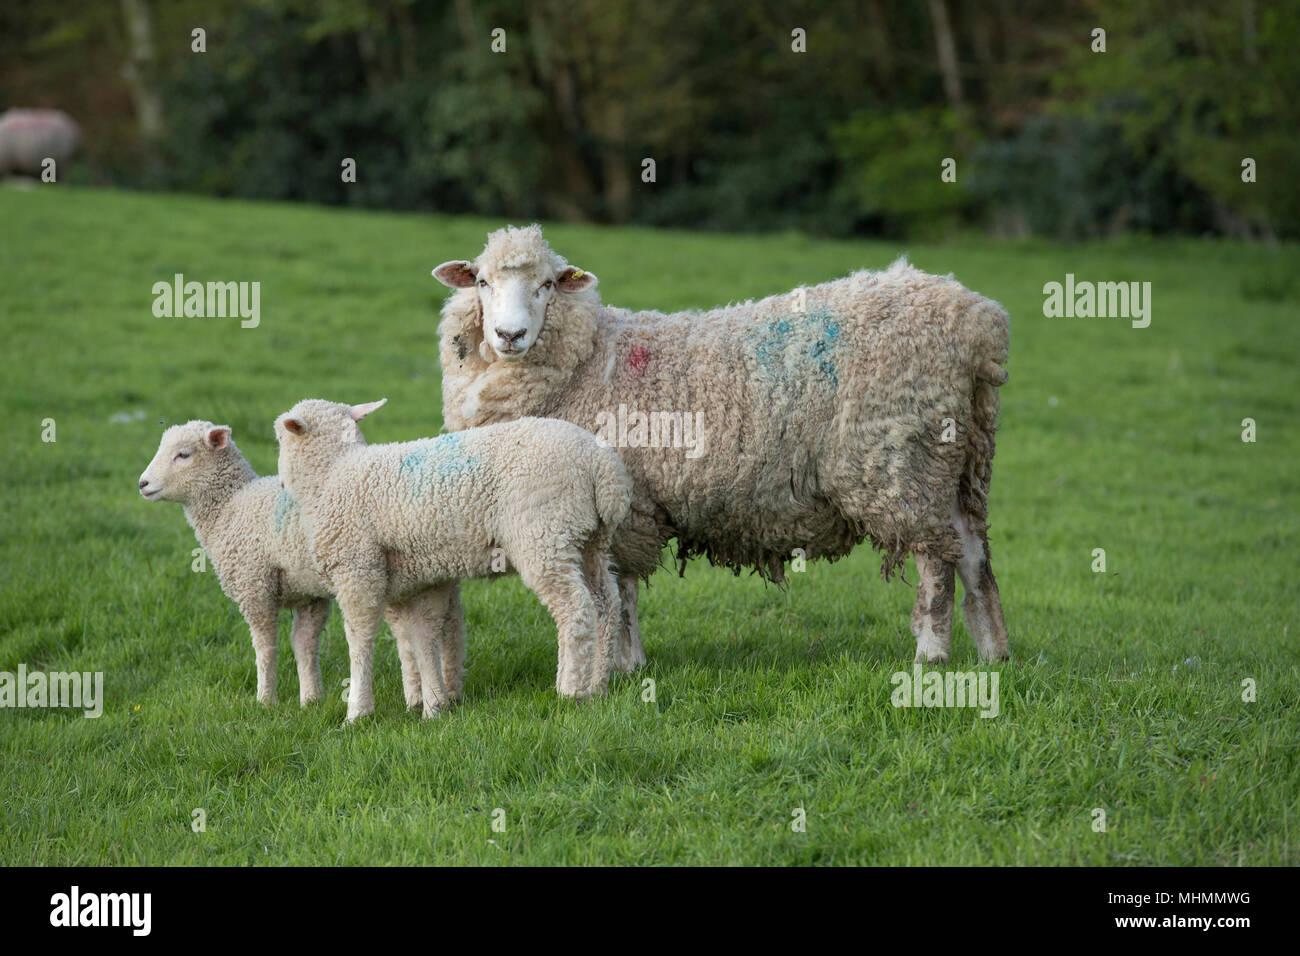 ewes and lambs in a sheep flock Stock Photo